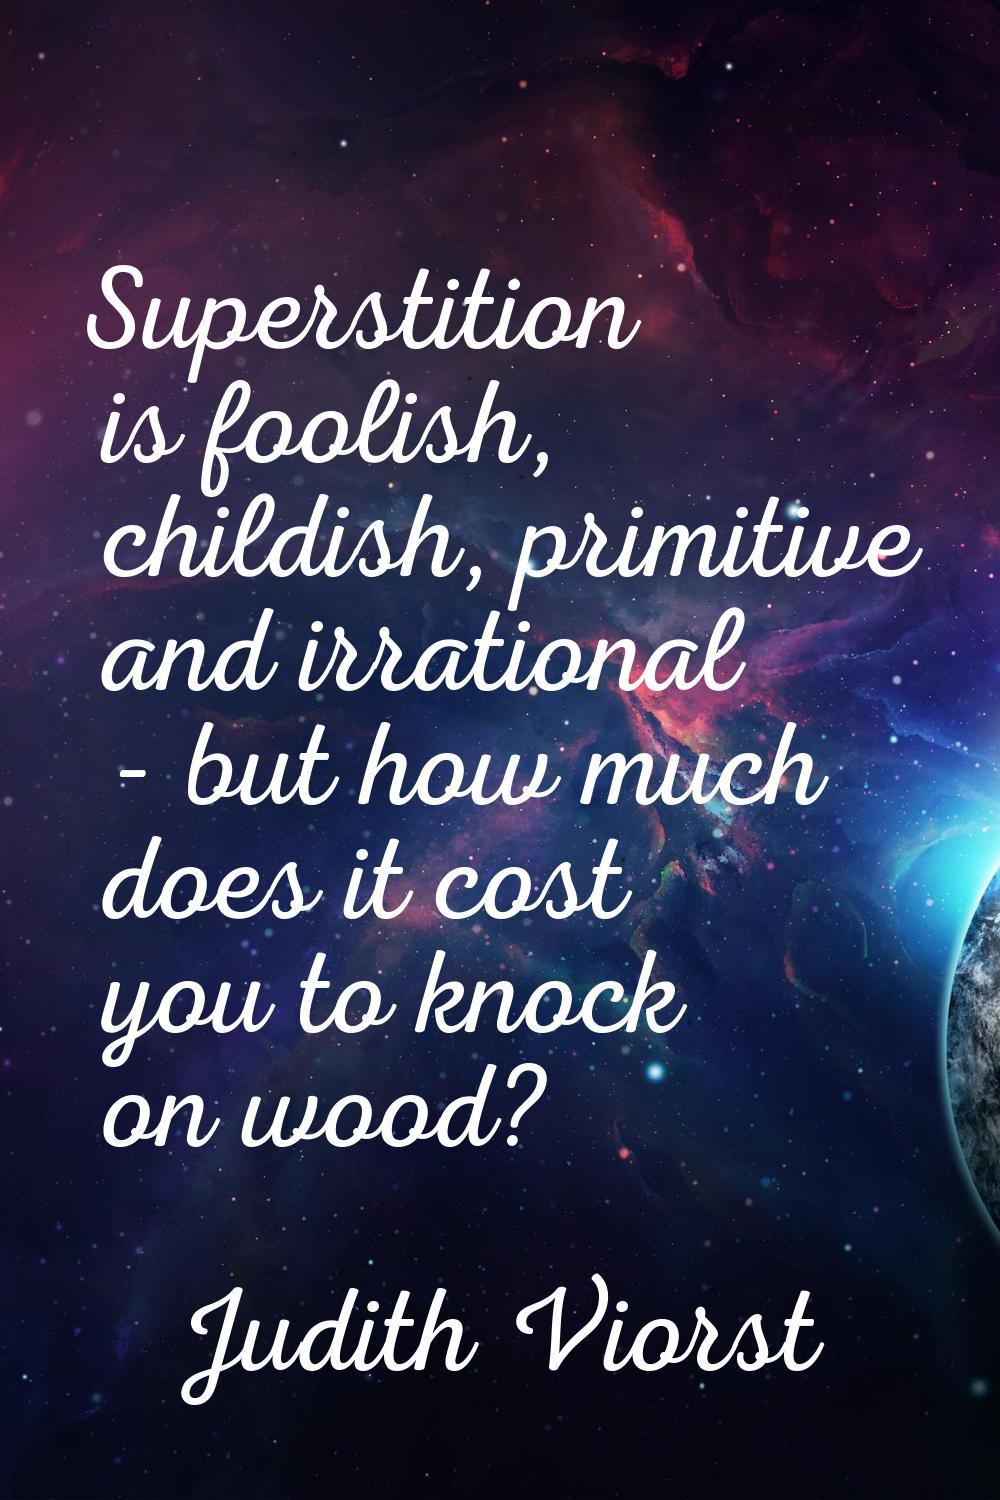 Superstition is foolish, childish, primitive and irrational - but how much does it cost you to knoc